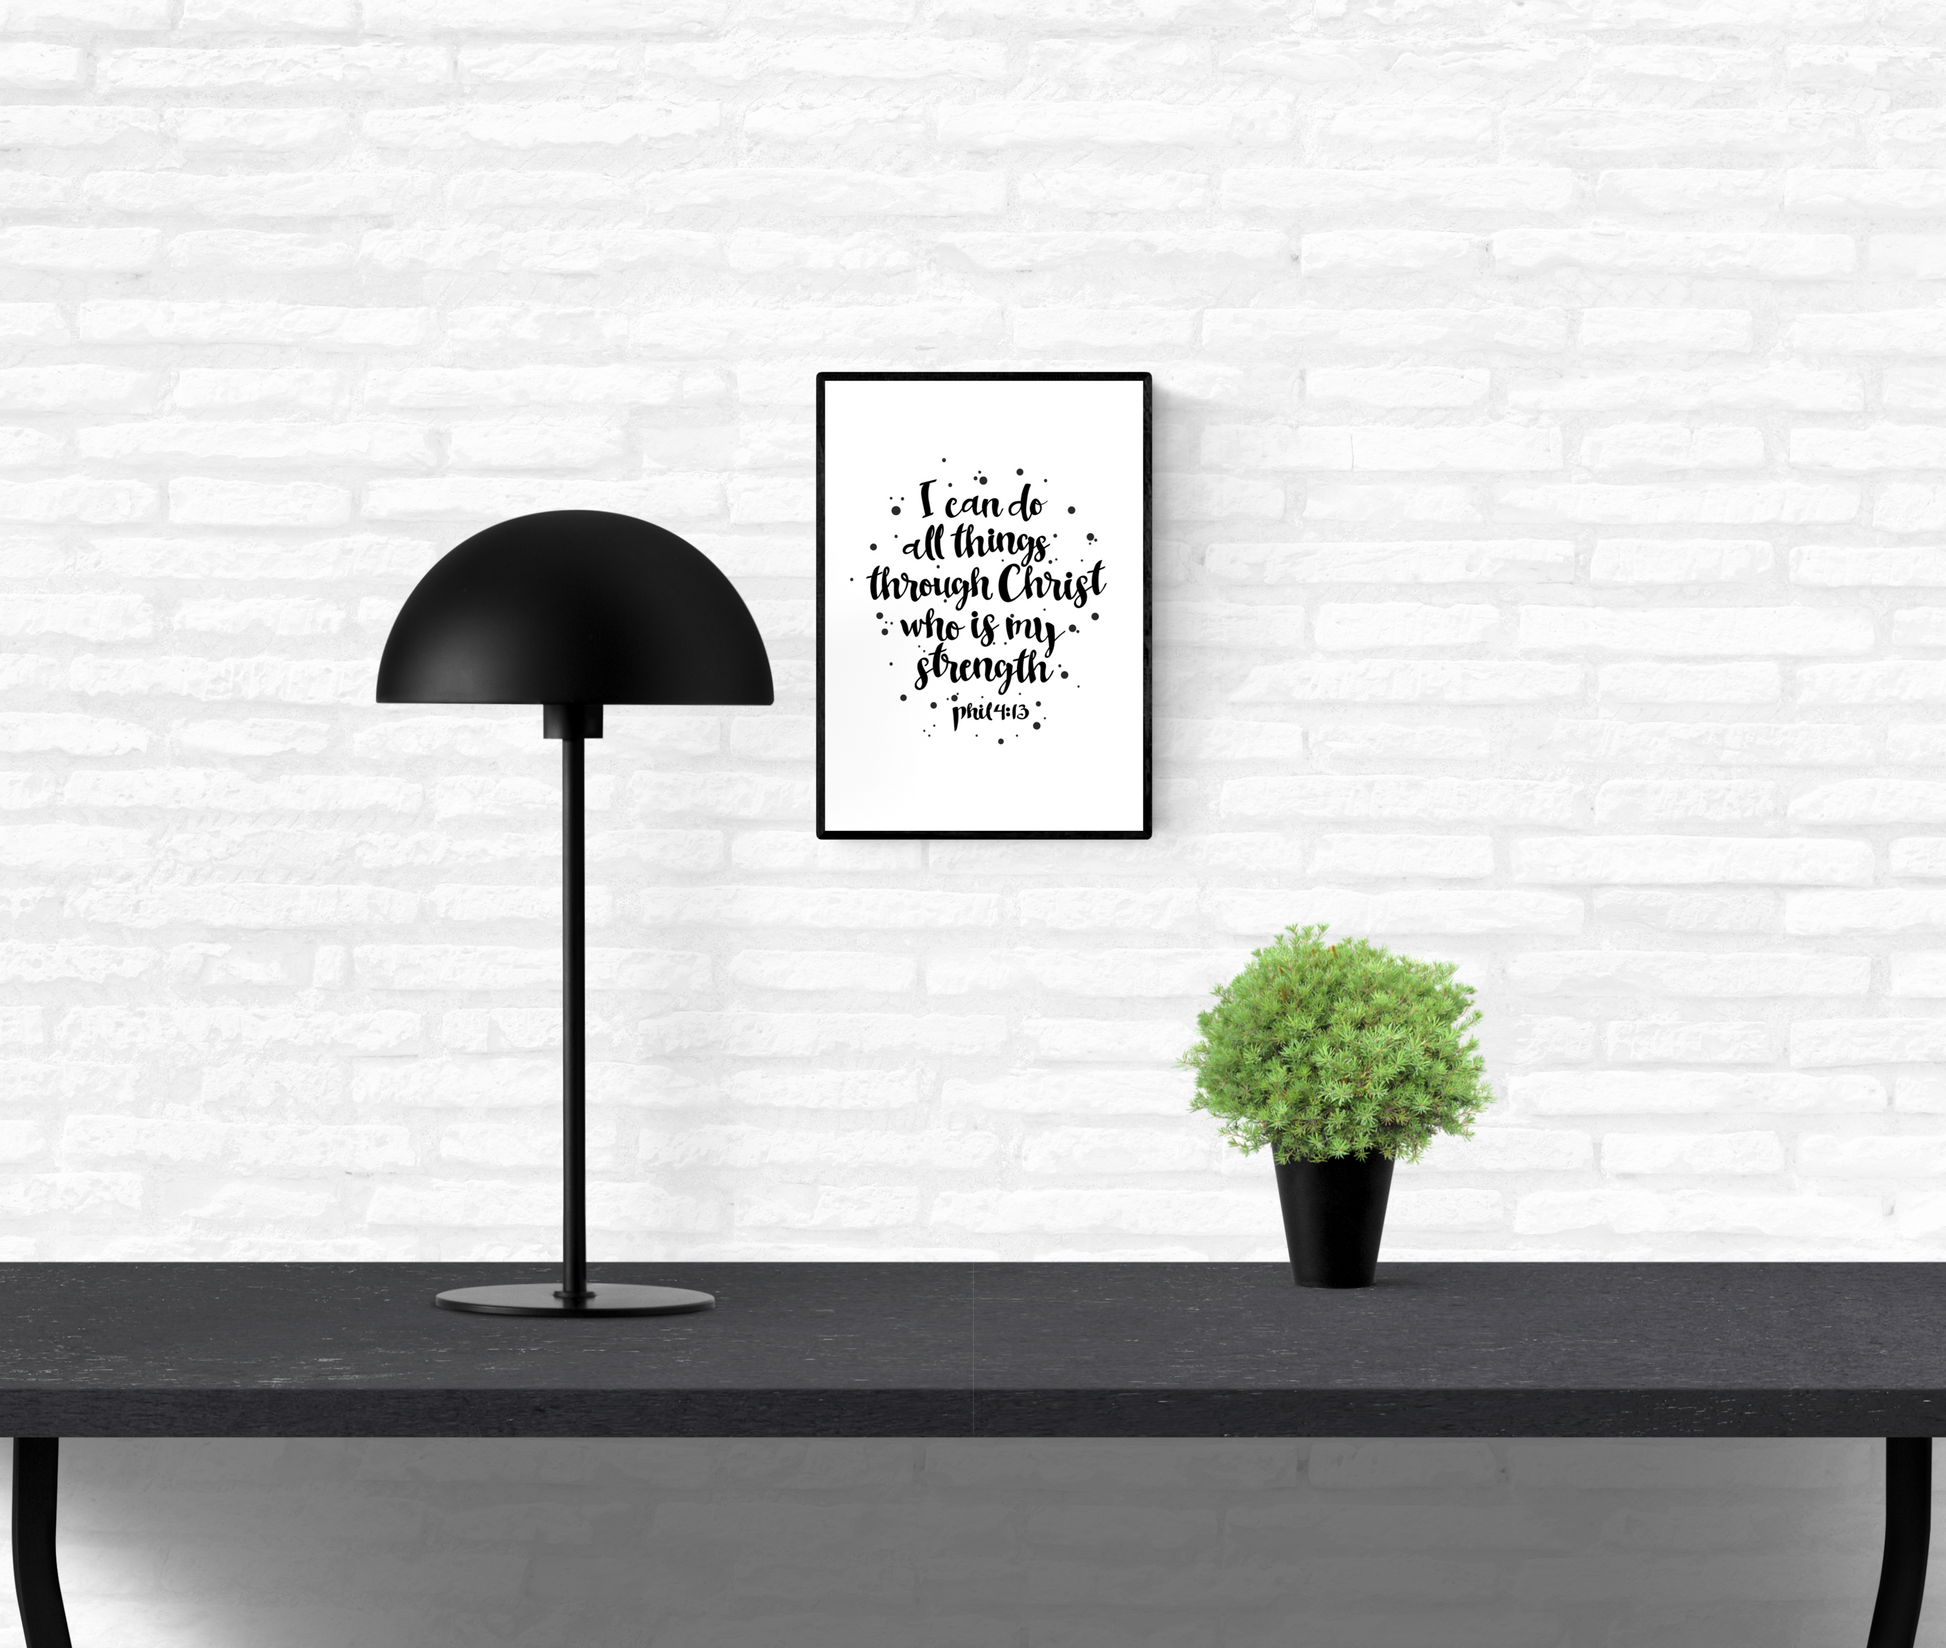 Quote wall print of Holy Bible scripture verse Philippians 4:13 mounted on an interior white brick wall